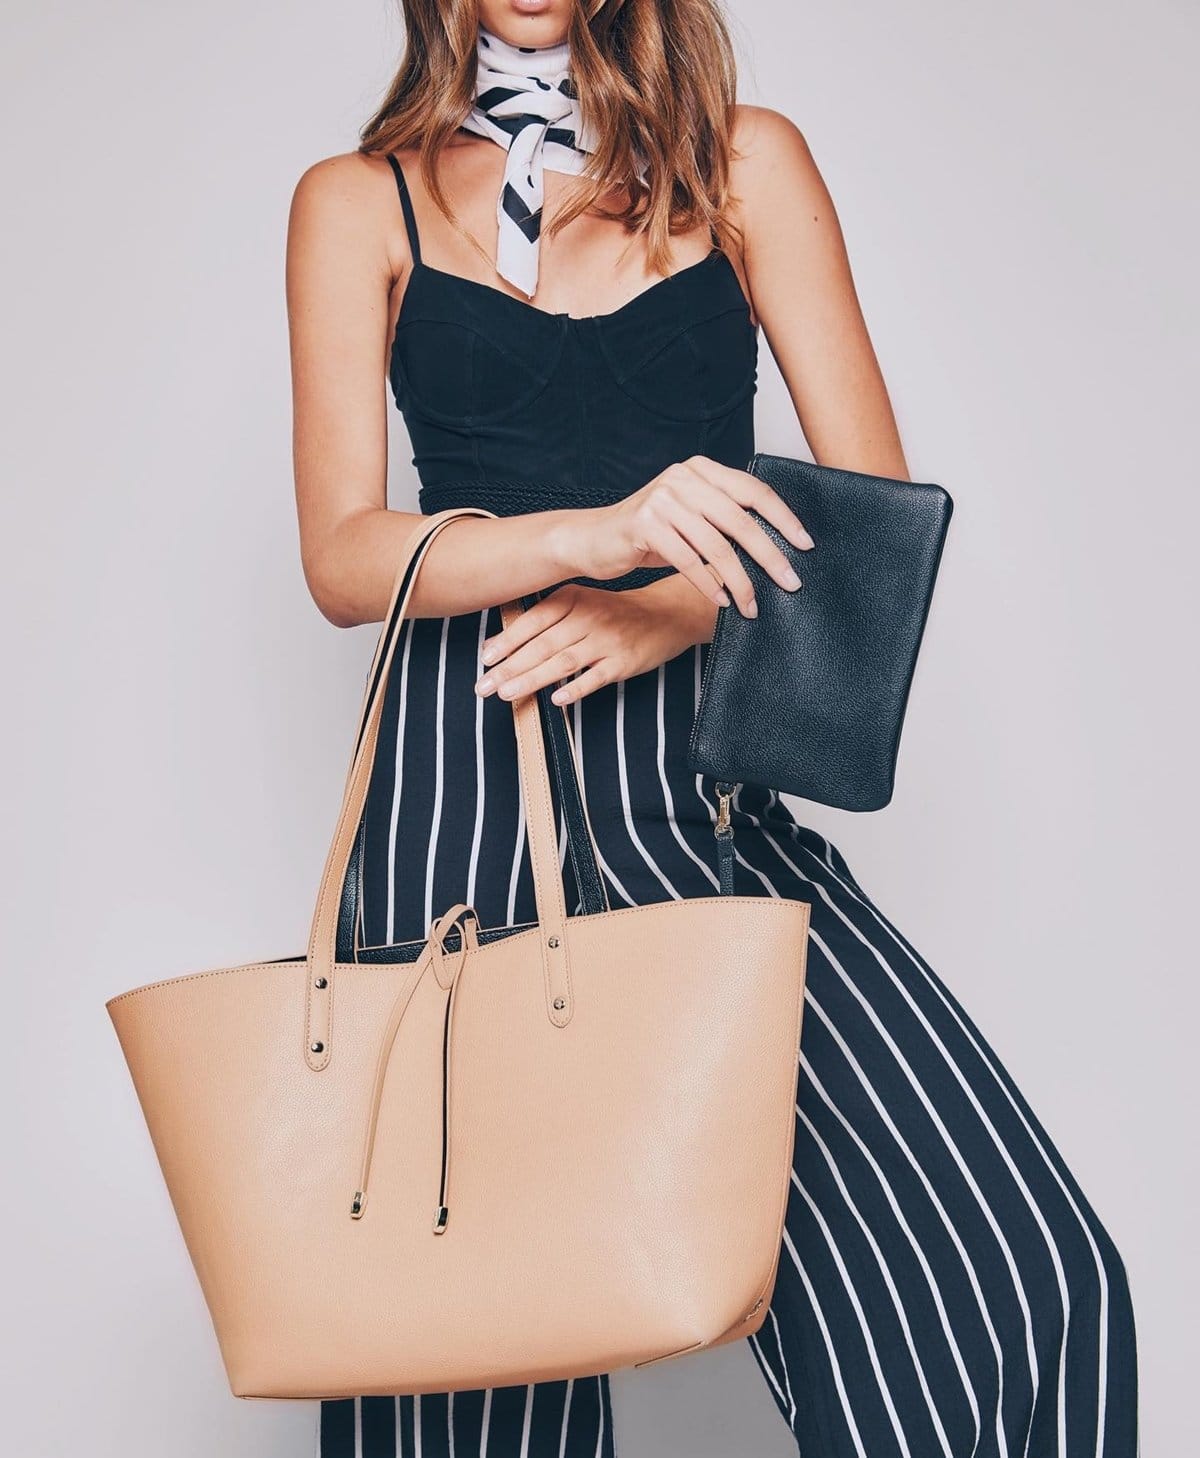 This reversible tote features a removable wristlet containing a 3000 mAh phone charging battery